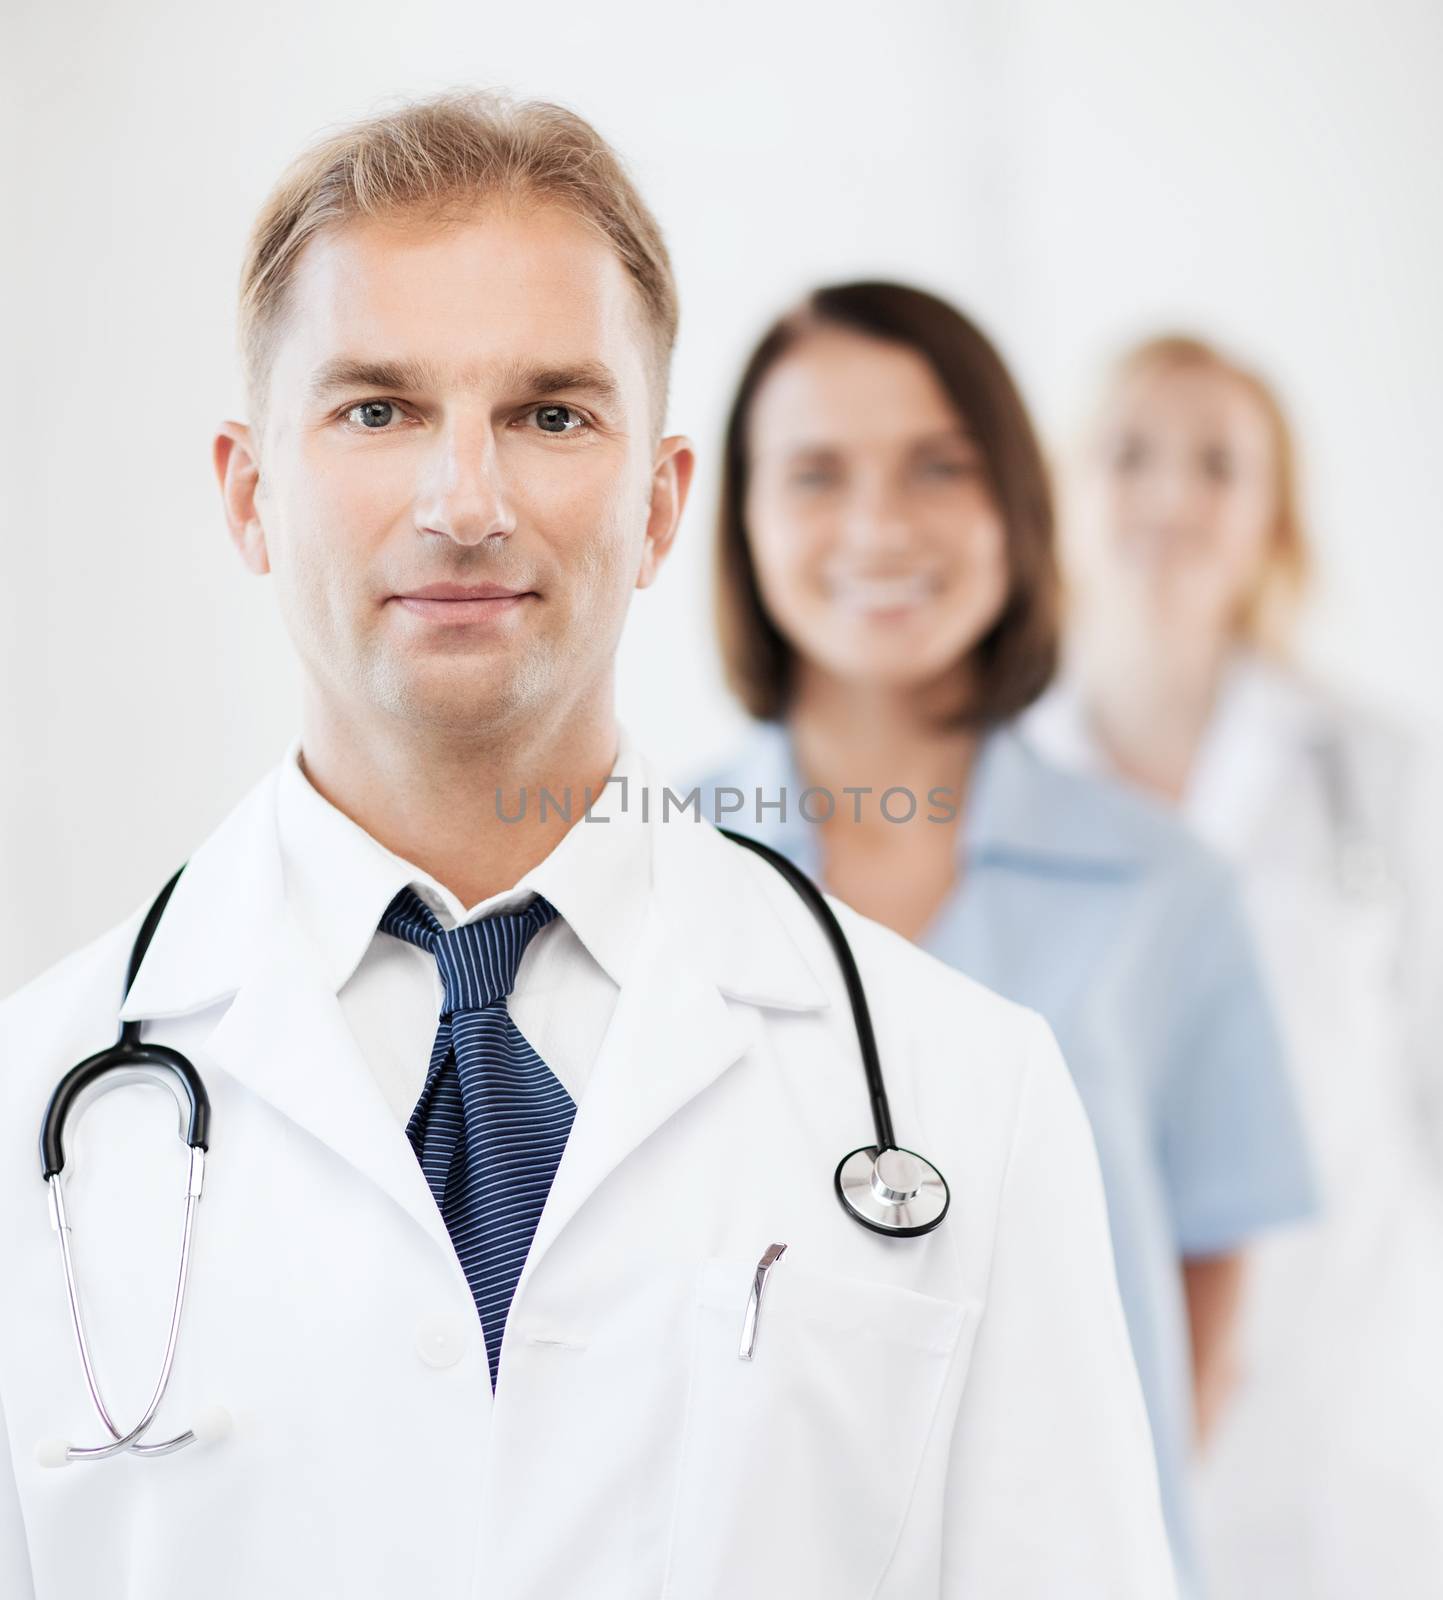 healthcare and medical concept - male doctor with stethoscope and colleagues